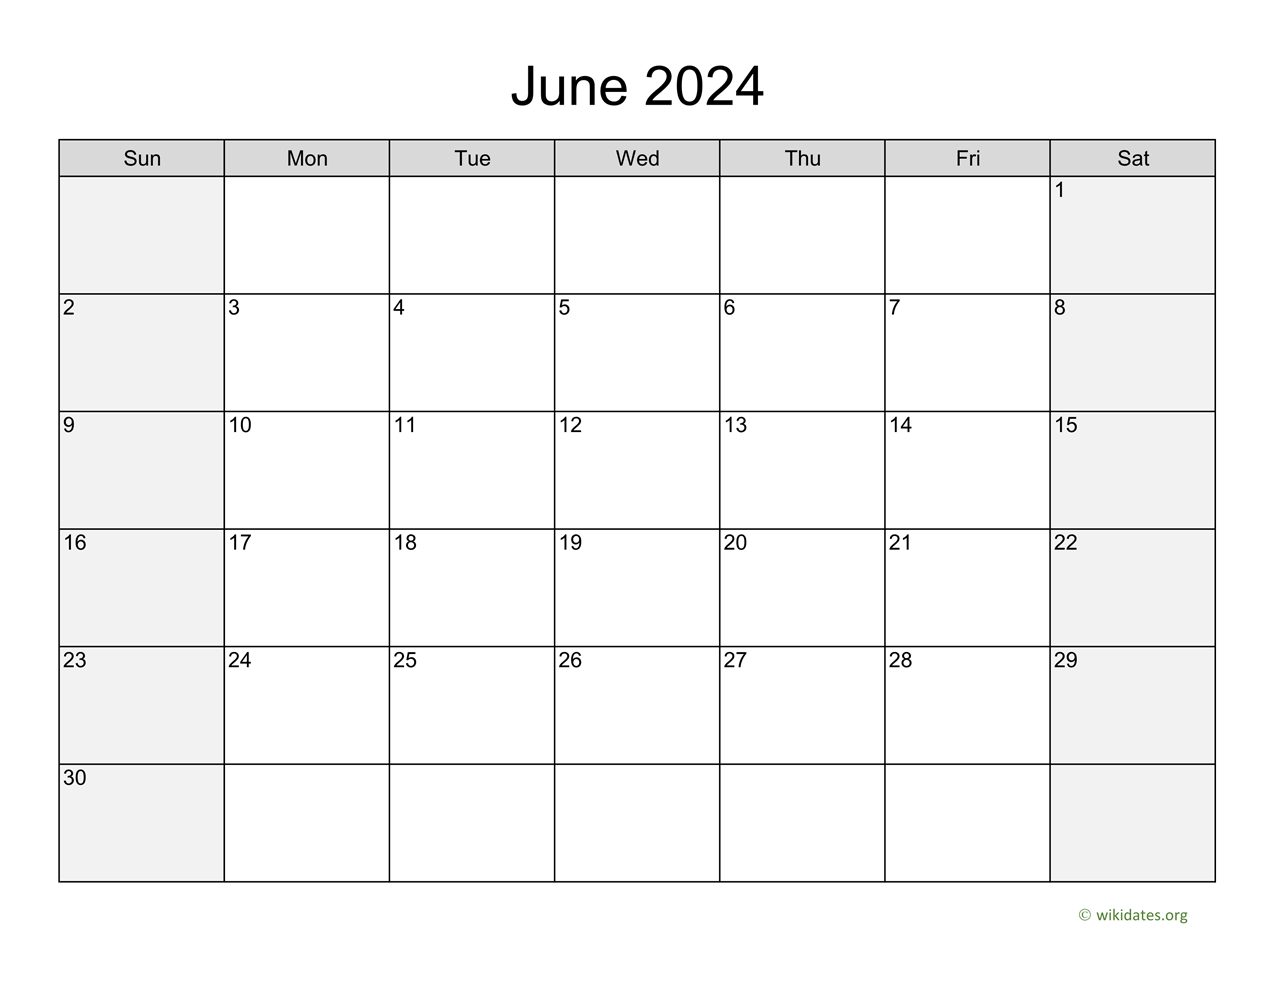 June 2024 Calendar with Weekend Shaded